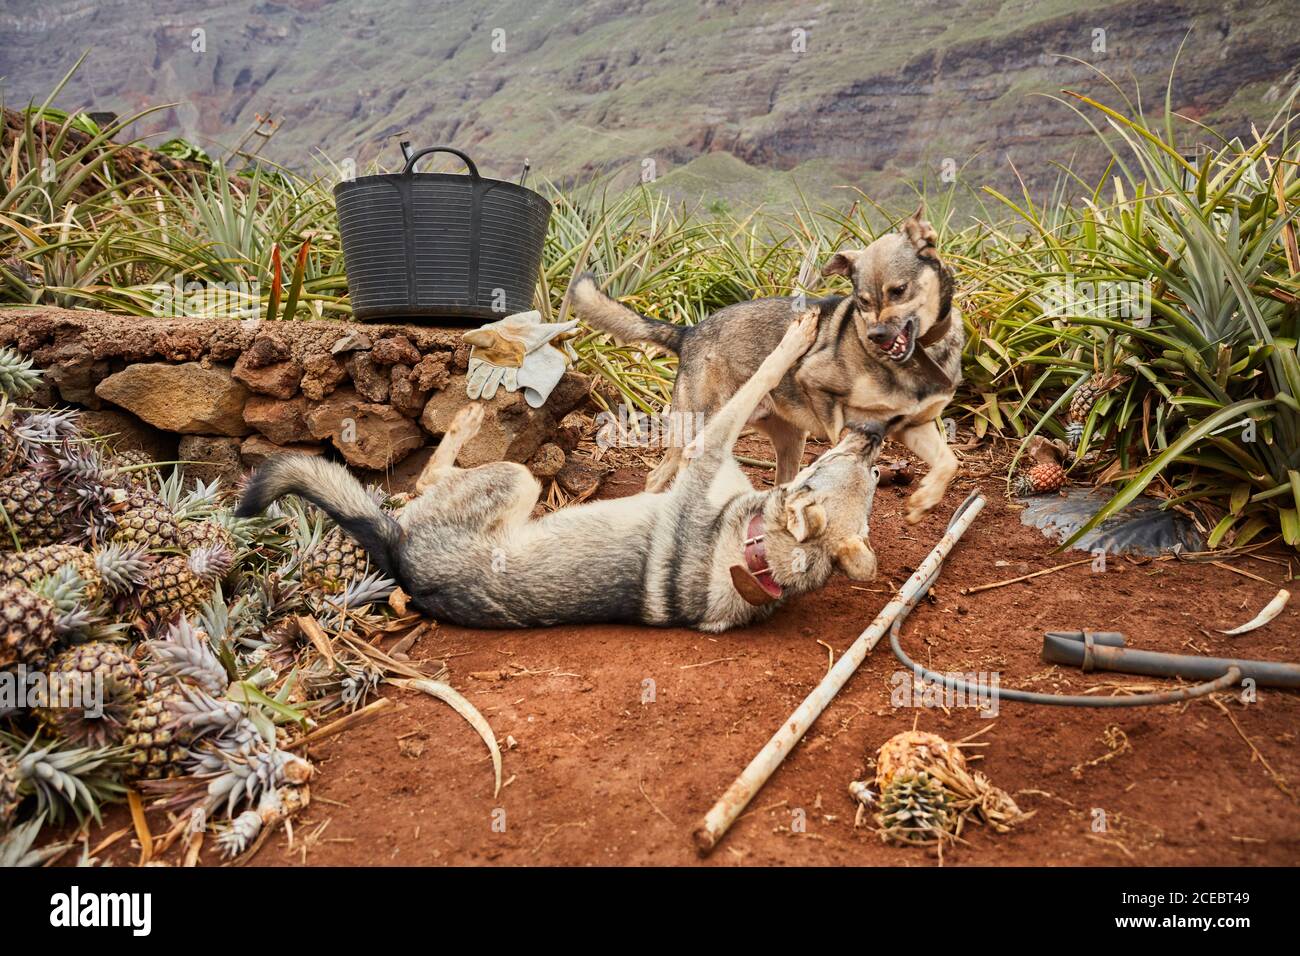 Two dogs on playing and fighting on ground of tropical farmland with growing pineapples, Canary Islands Stock Photo